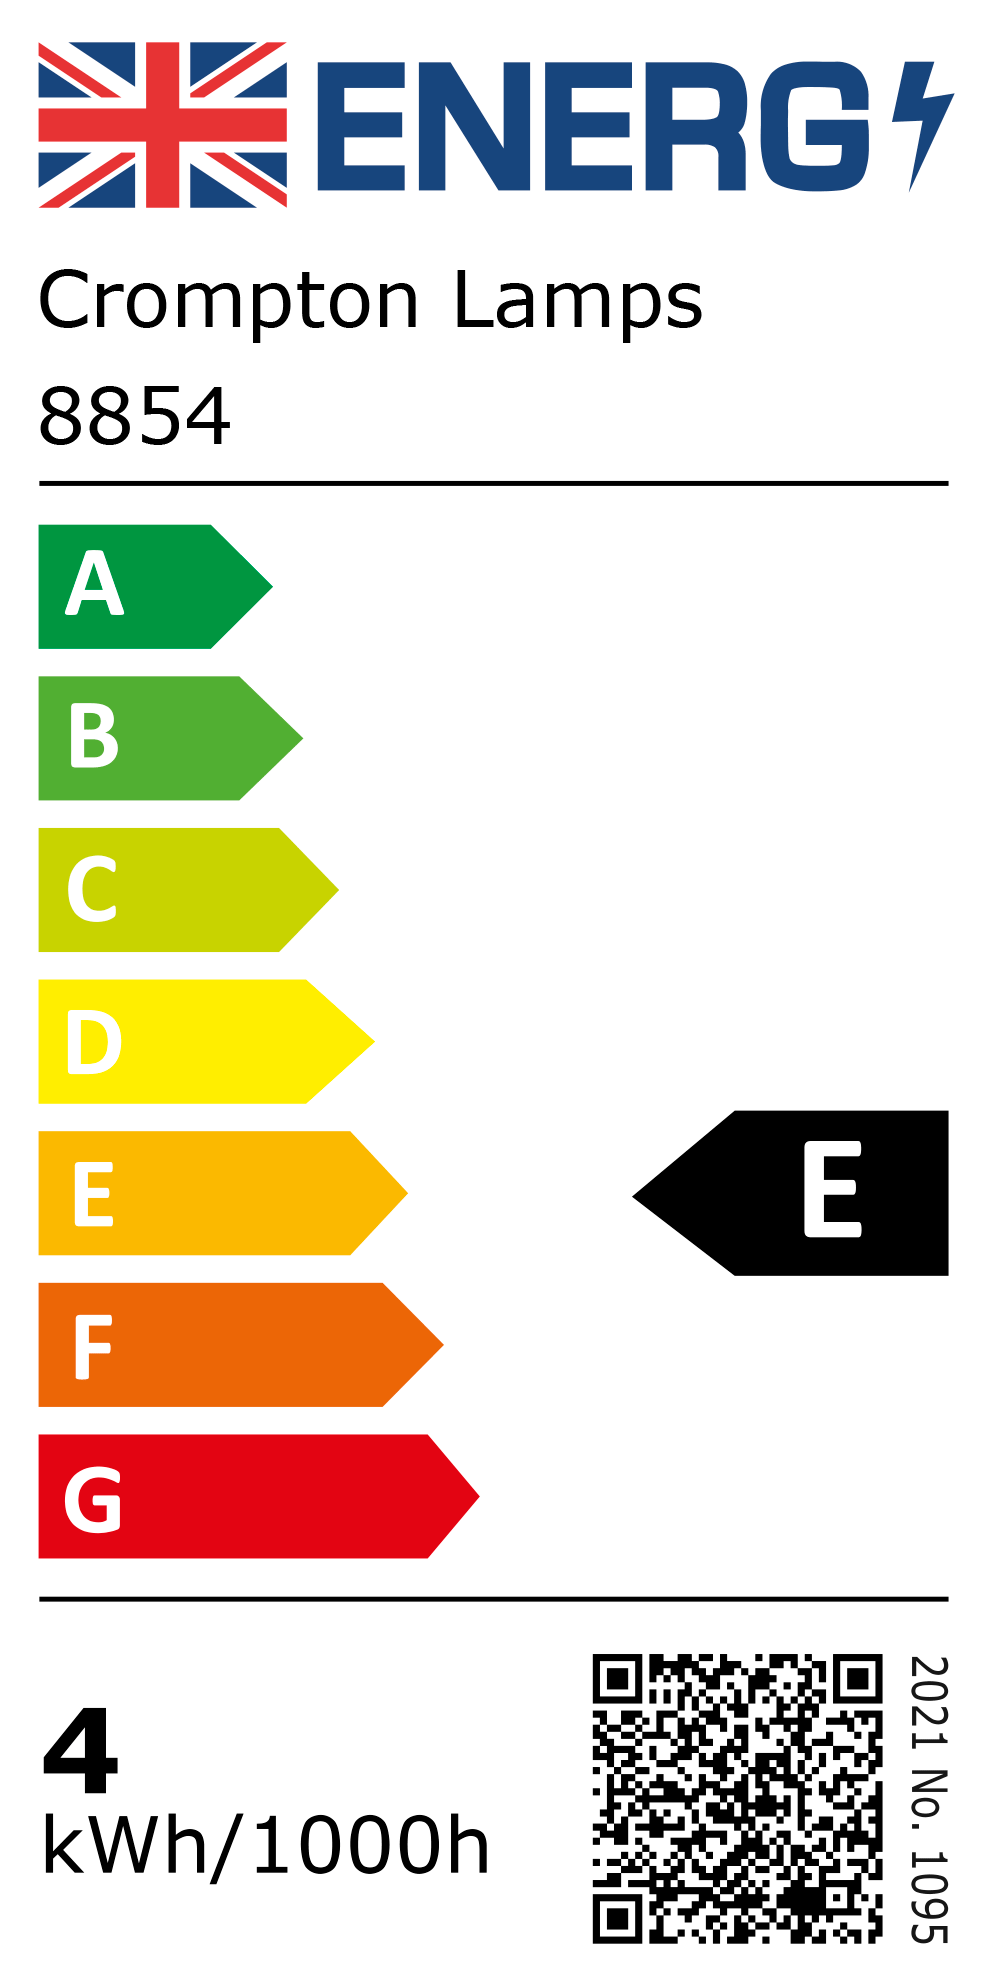 New 2021 Energy Rating Label: Stock Code 8854